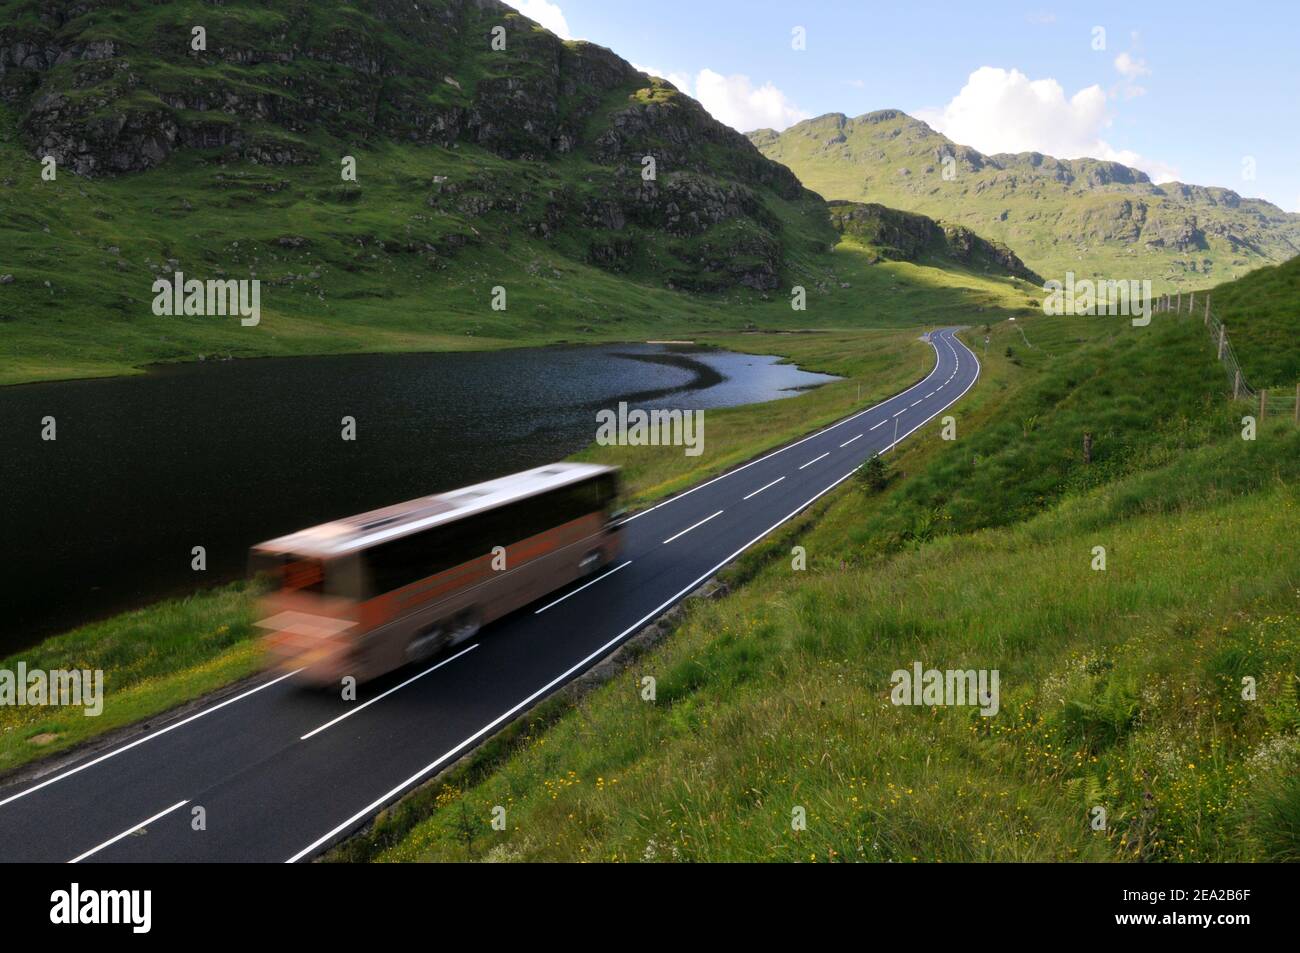 Bus on mountains road in Scotland.Road A83 Argyll and Bute. Stock Photo